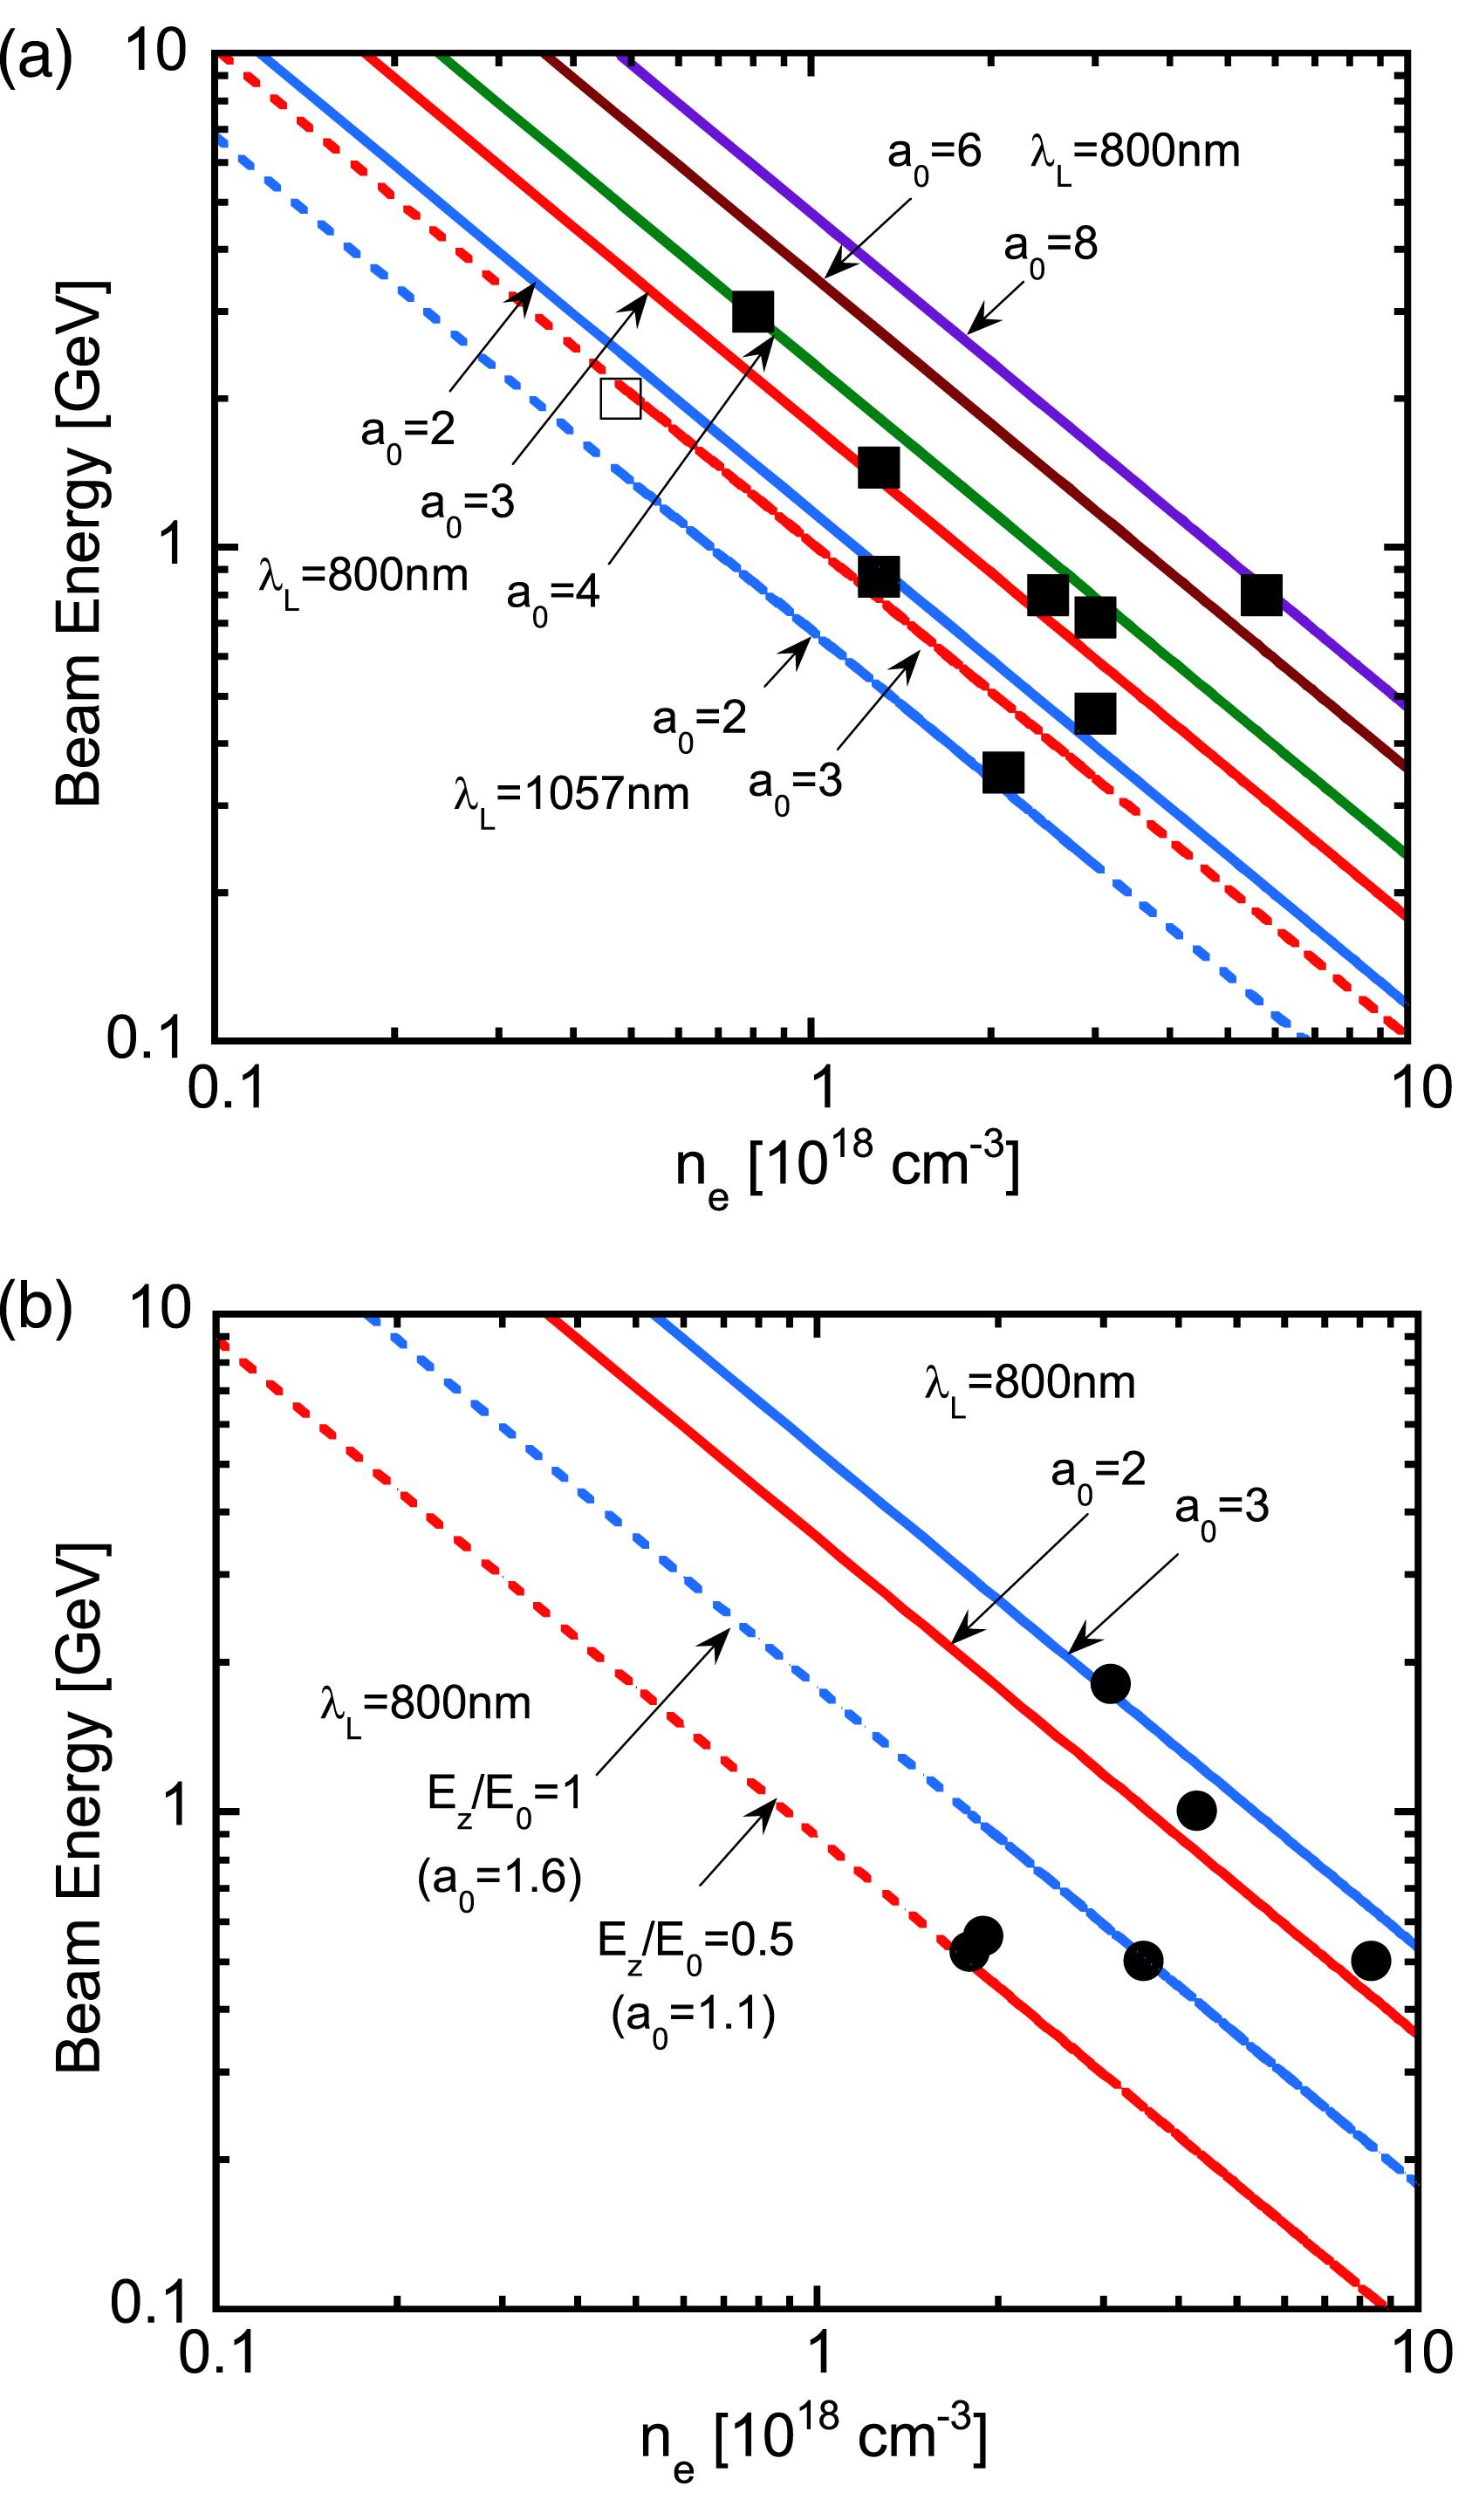 A comparison of measured electron beam energies in laser wakefield acceleration with the energy scaling as a function of the operating plasma density for (a) the self-guided case in the bubble regime at laser wavelengths of 800 nm (solid line) and 1057 nm (dashed line) and (b) the channel-guided case in both the quasi-linear regime (dashed line) and the bubble regime (solid line). The experimental data are plotted with filled squares for and the open square for in (a), and with filled circles for in (b).